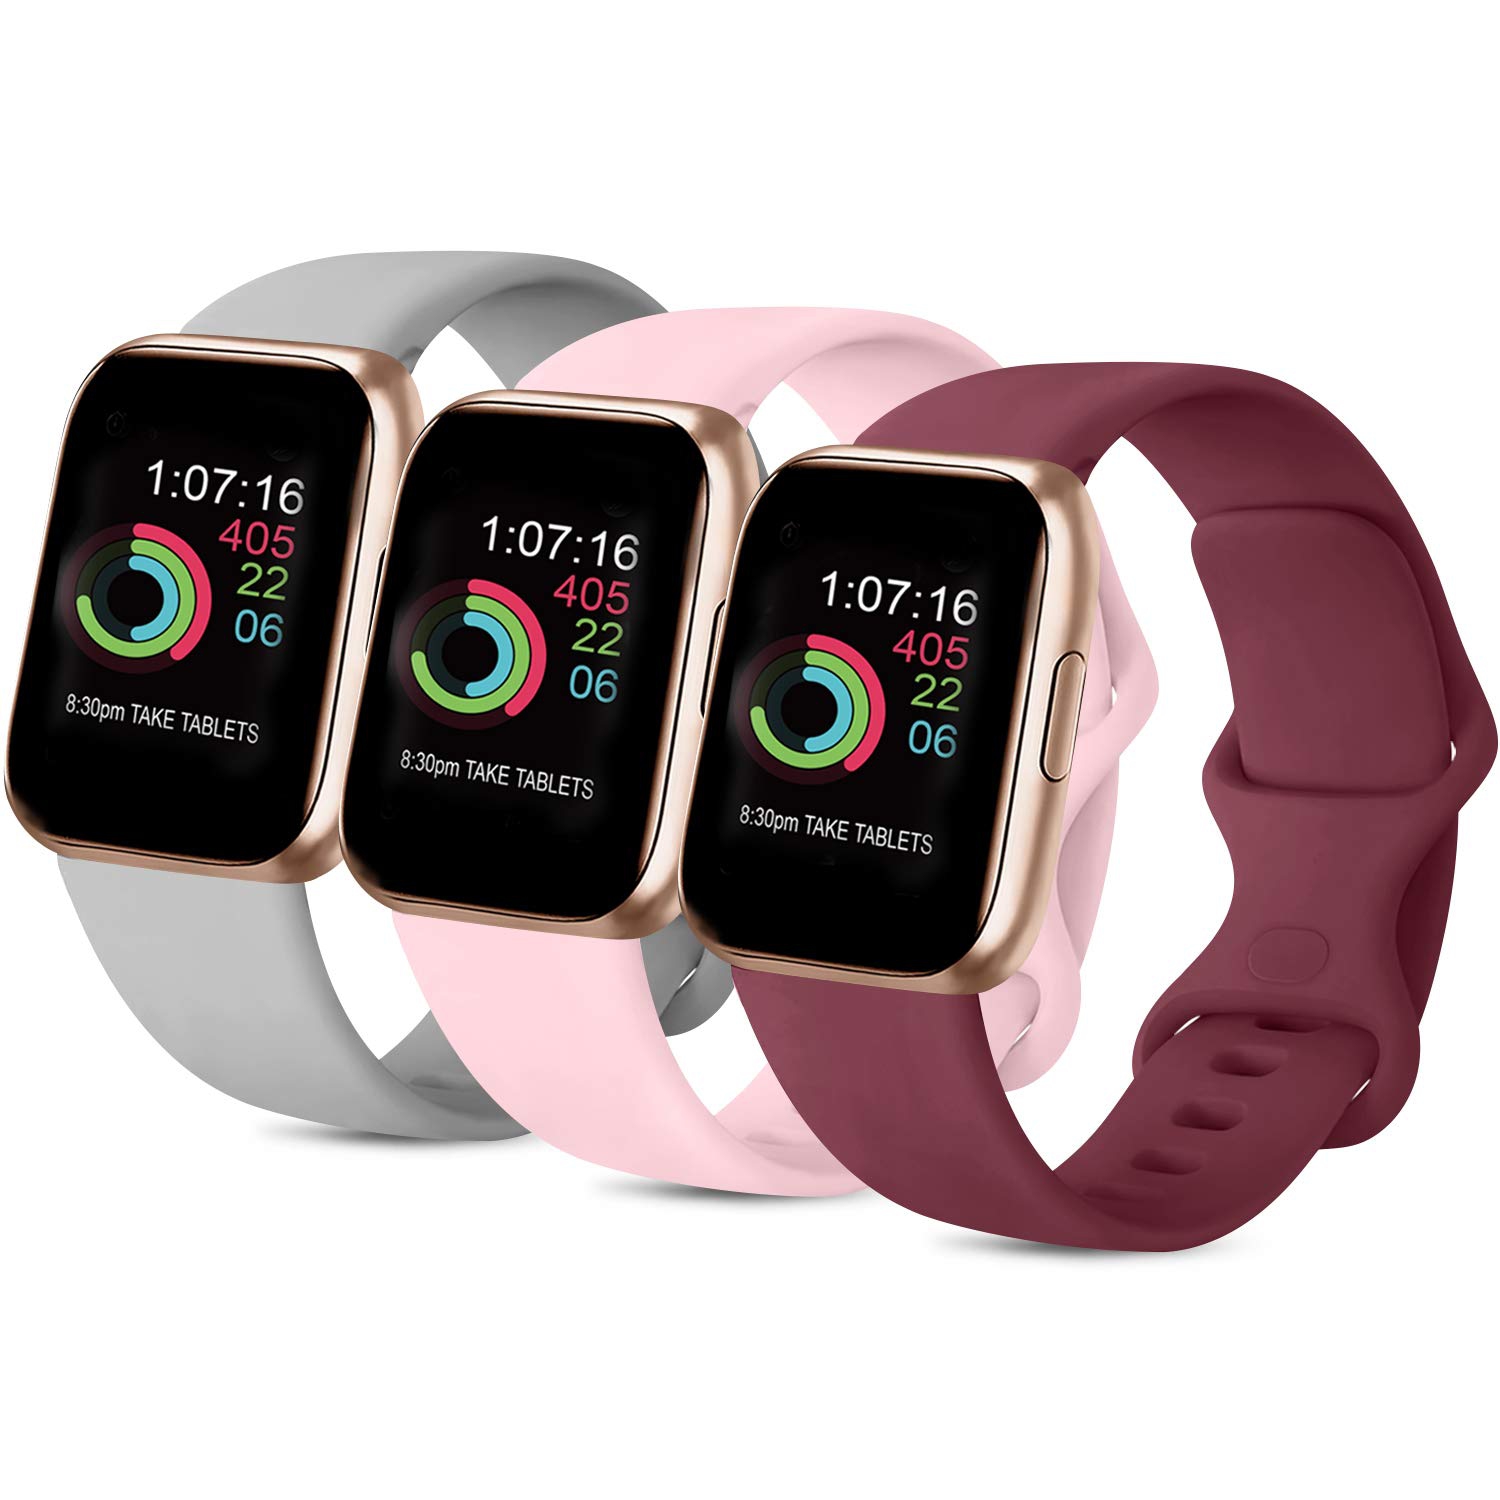 Apple Watch Series 3 New Only